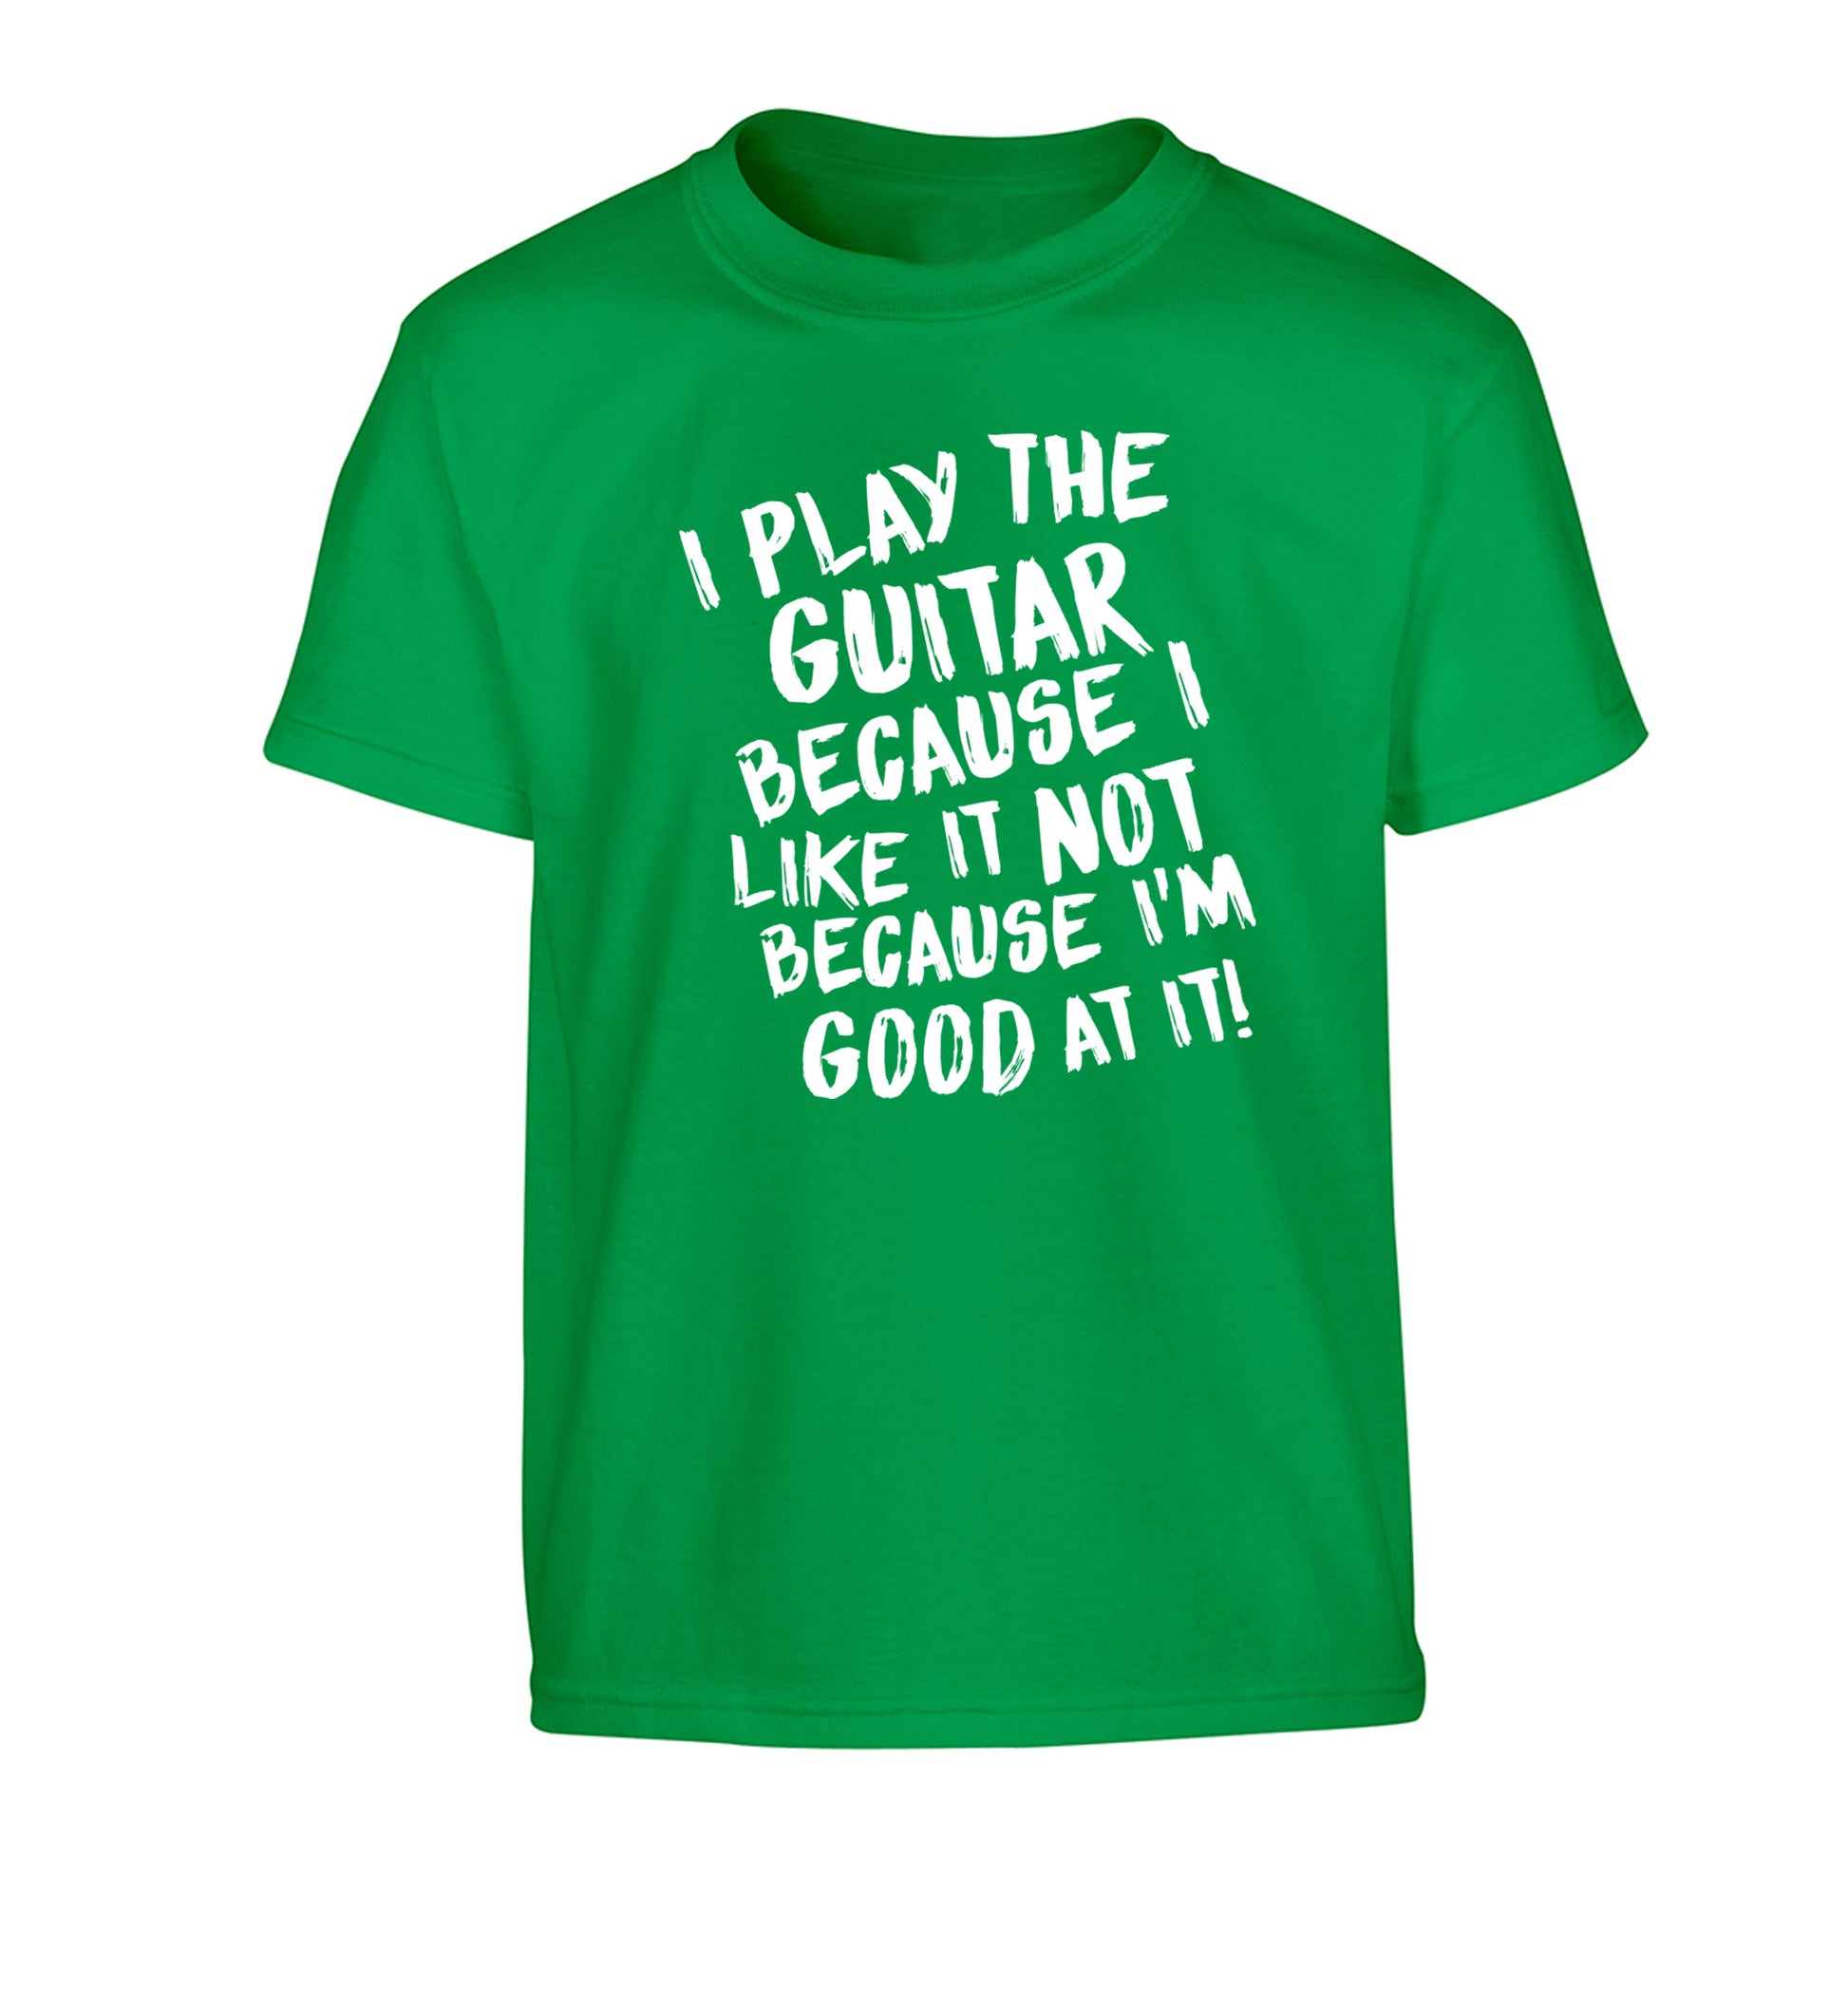 I play the guitar because I like it not because I'm good at it Children's green Tshirt 12-14 Years